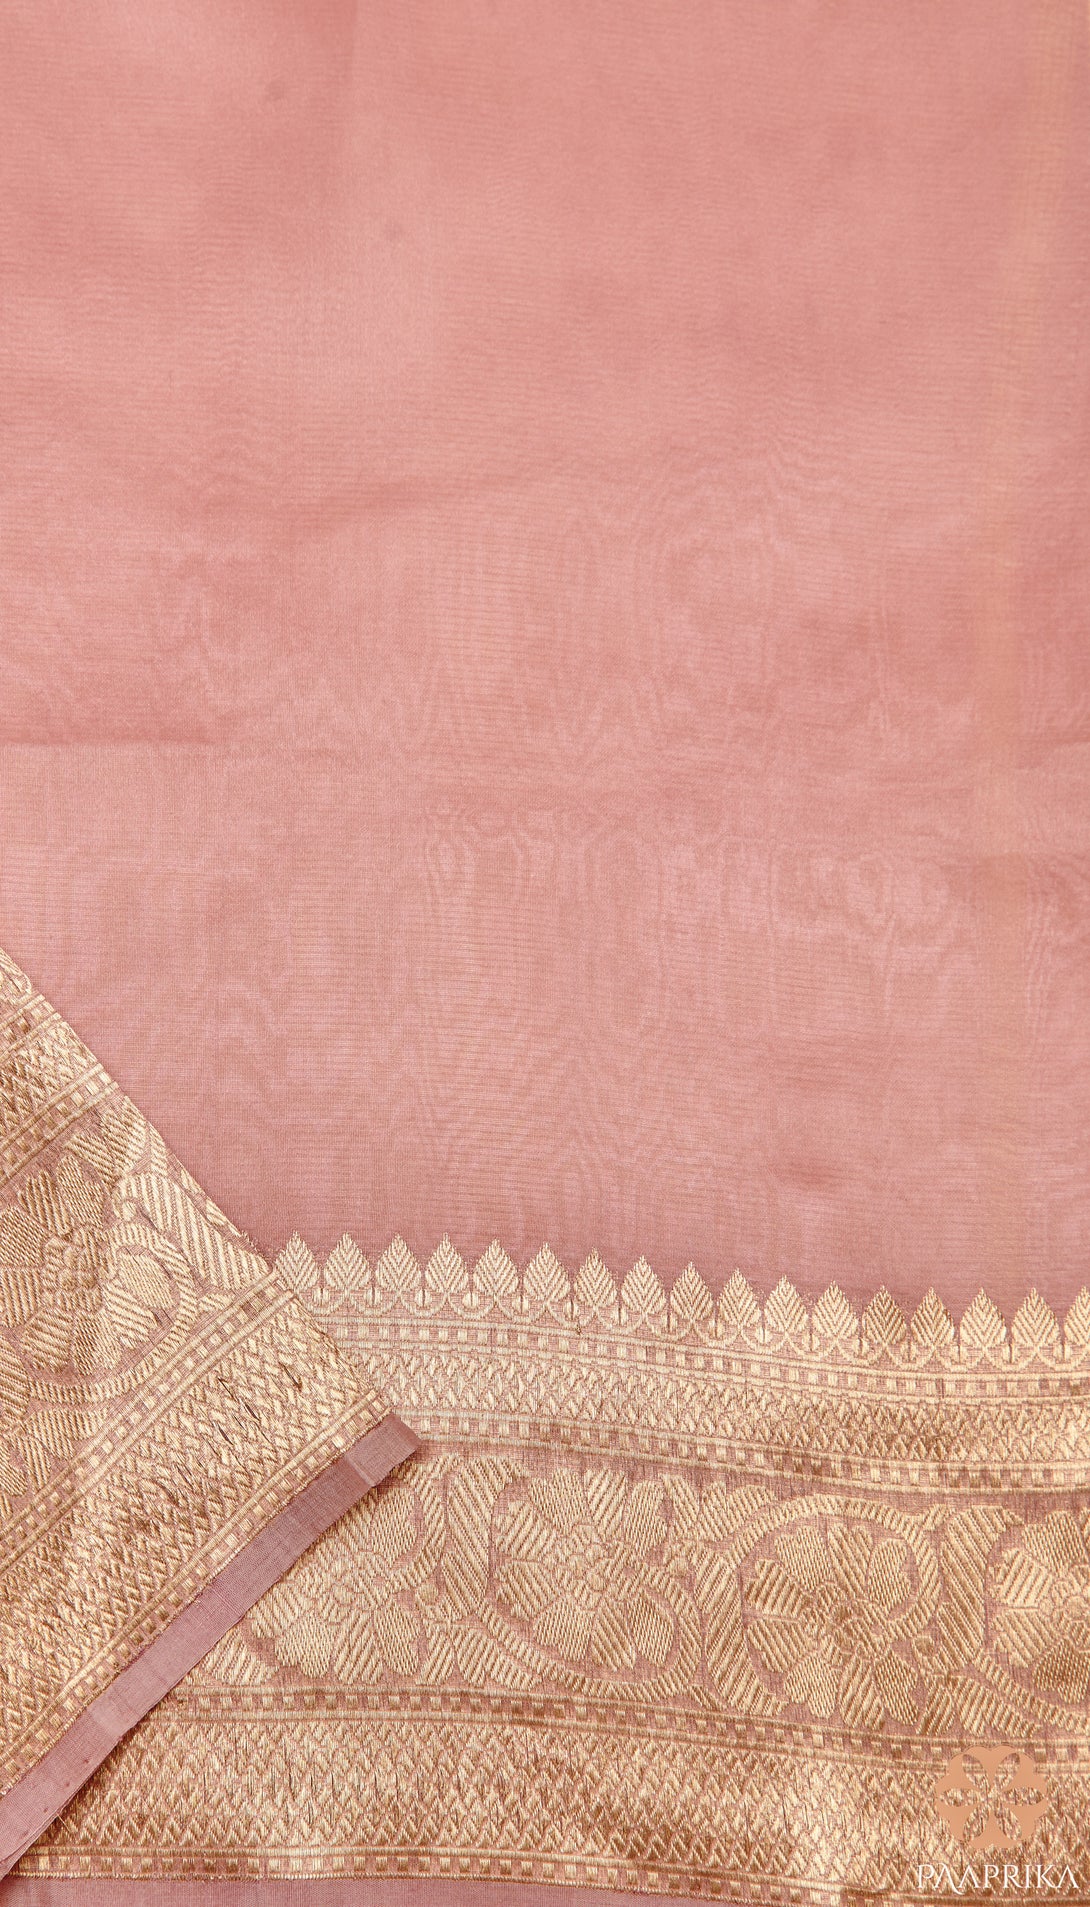 Pastel Onion Pink Banarasi Organza Saree paired with complementary accessories. The saree's delicate pastel hue and intricate handwoven pattern create a stunning ensemble, harmoniously complemented by the accessories for a complete and elegant appearance.